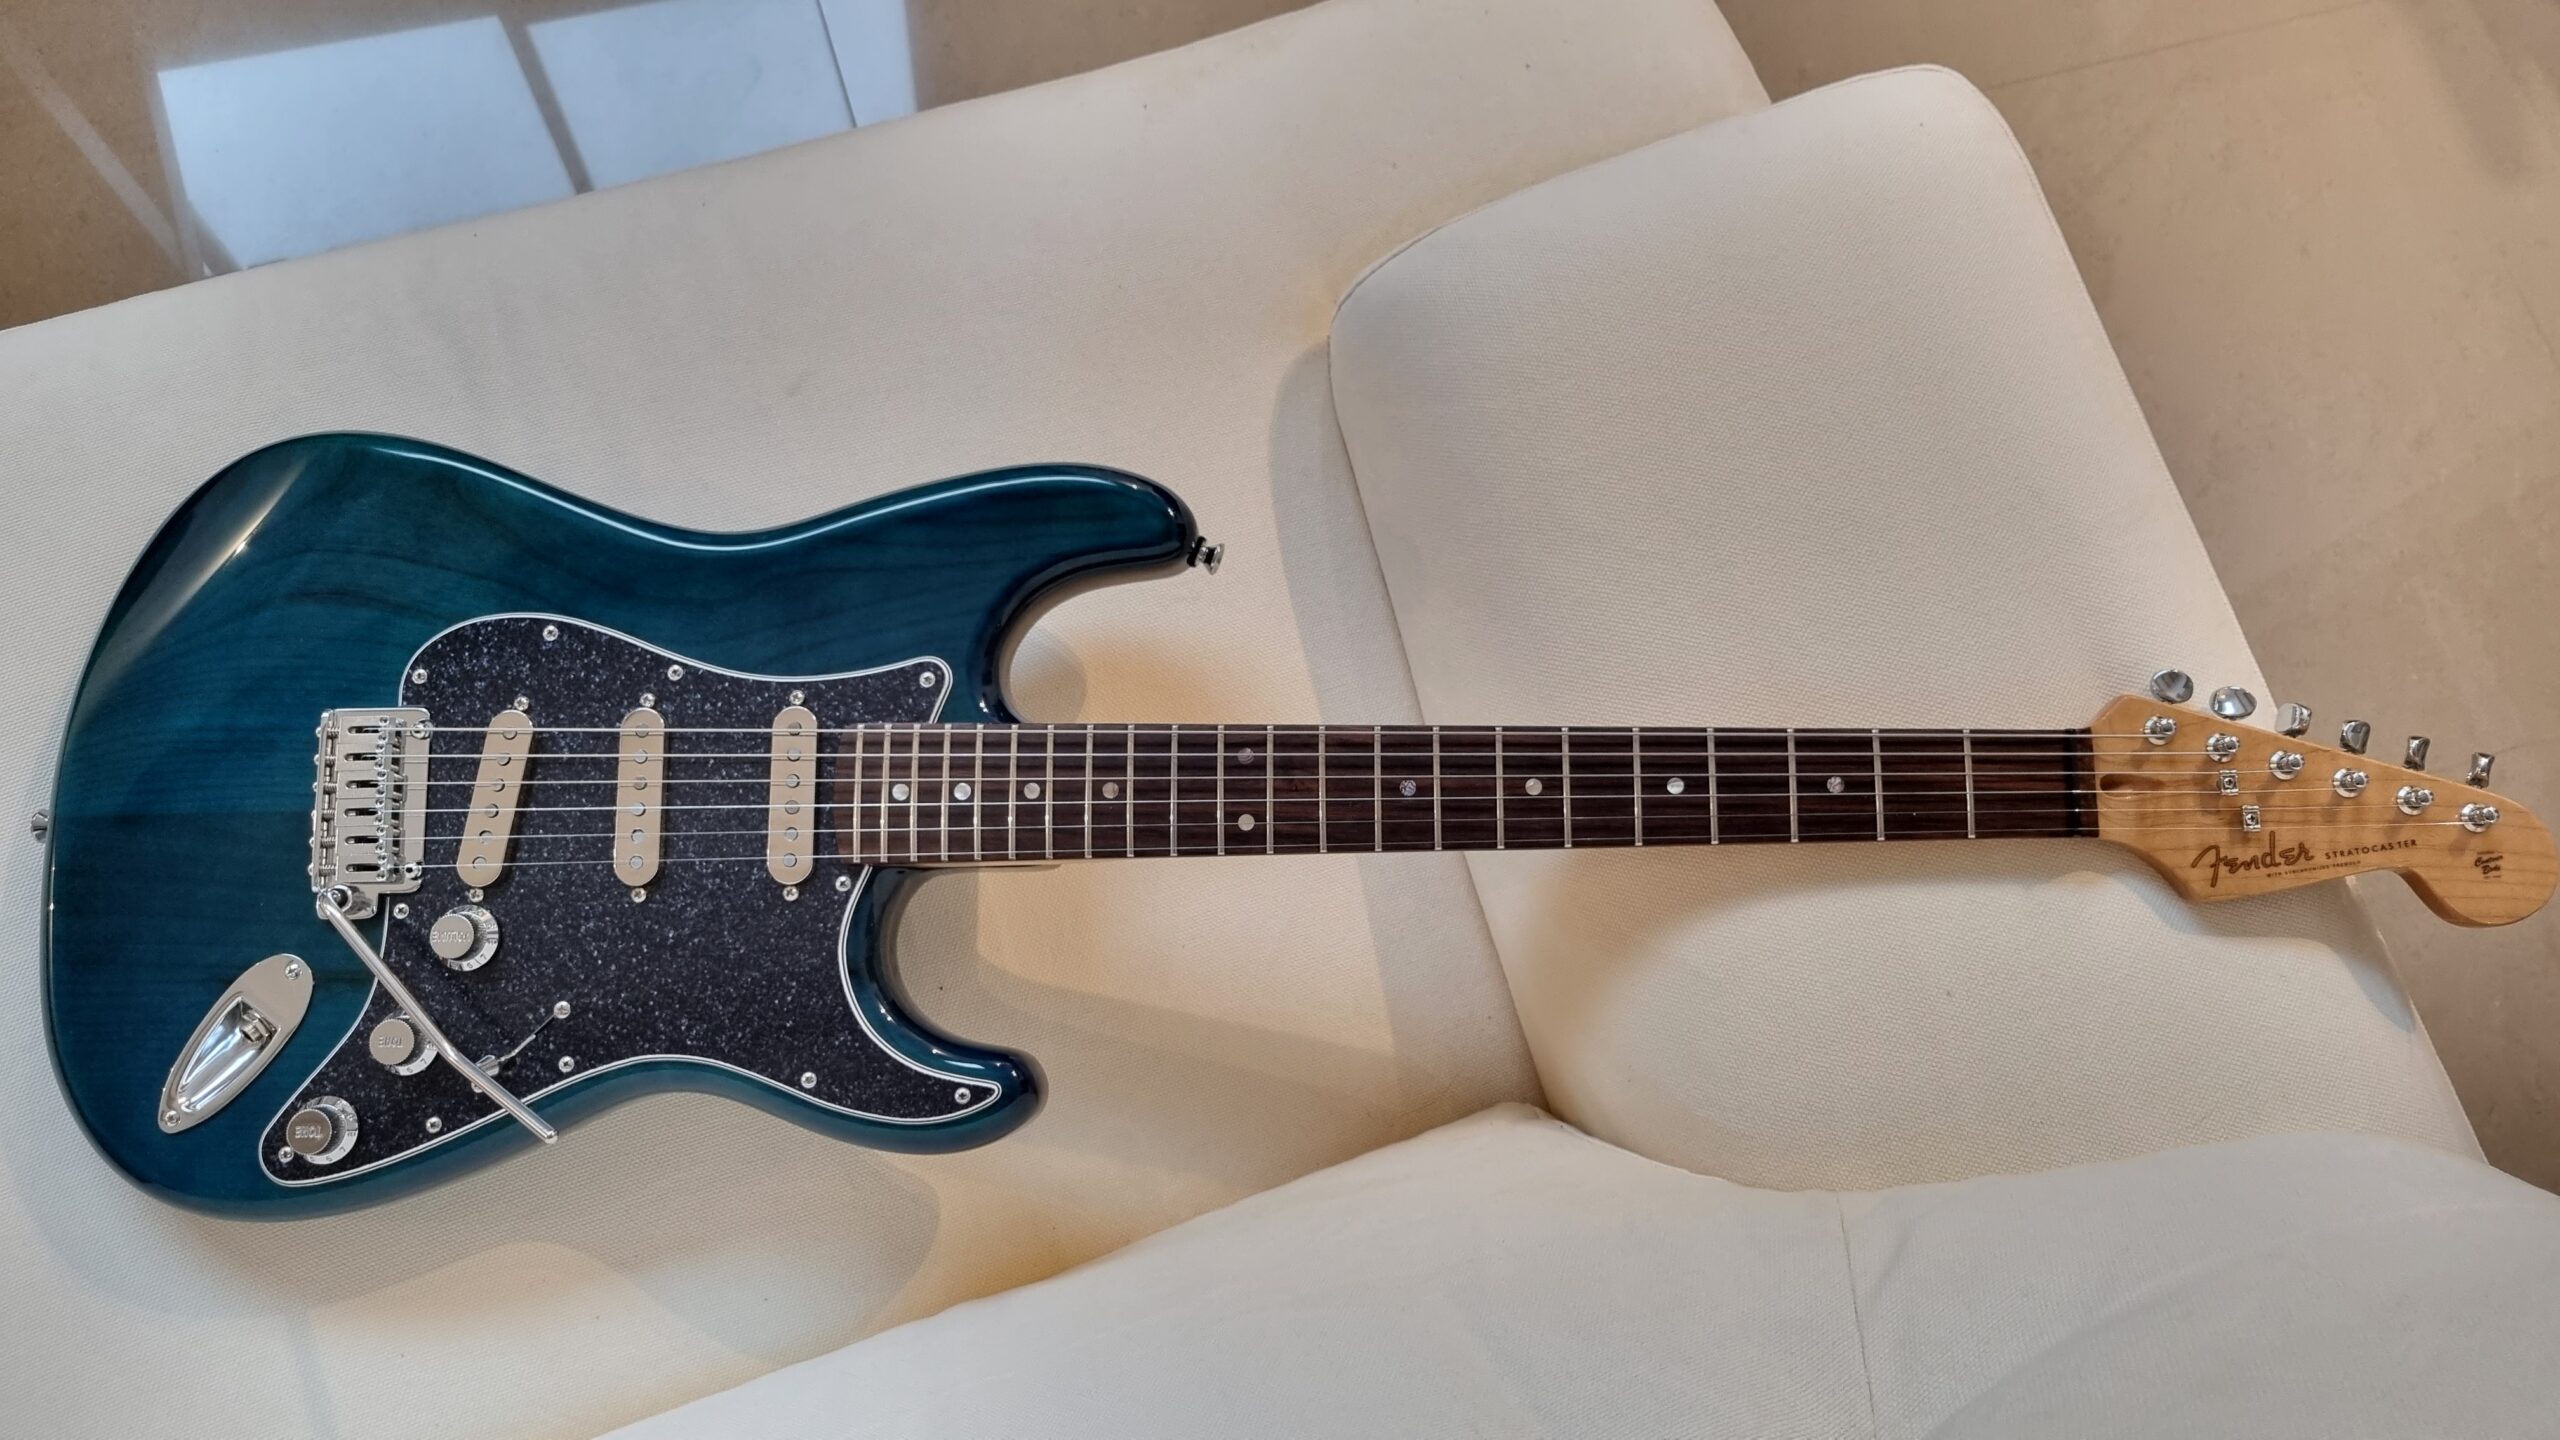 Christophe's Strat built using a GA Transparent blue body & GA Rosewood & roasted flame maple neck. Great build!